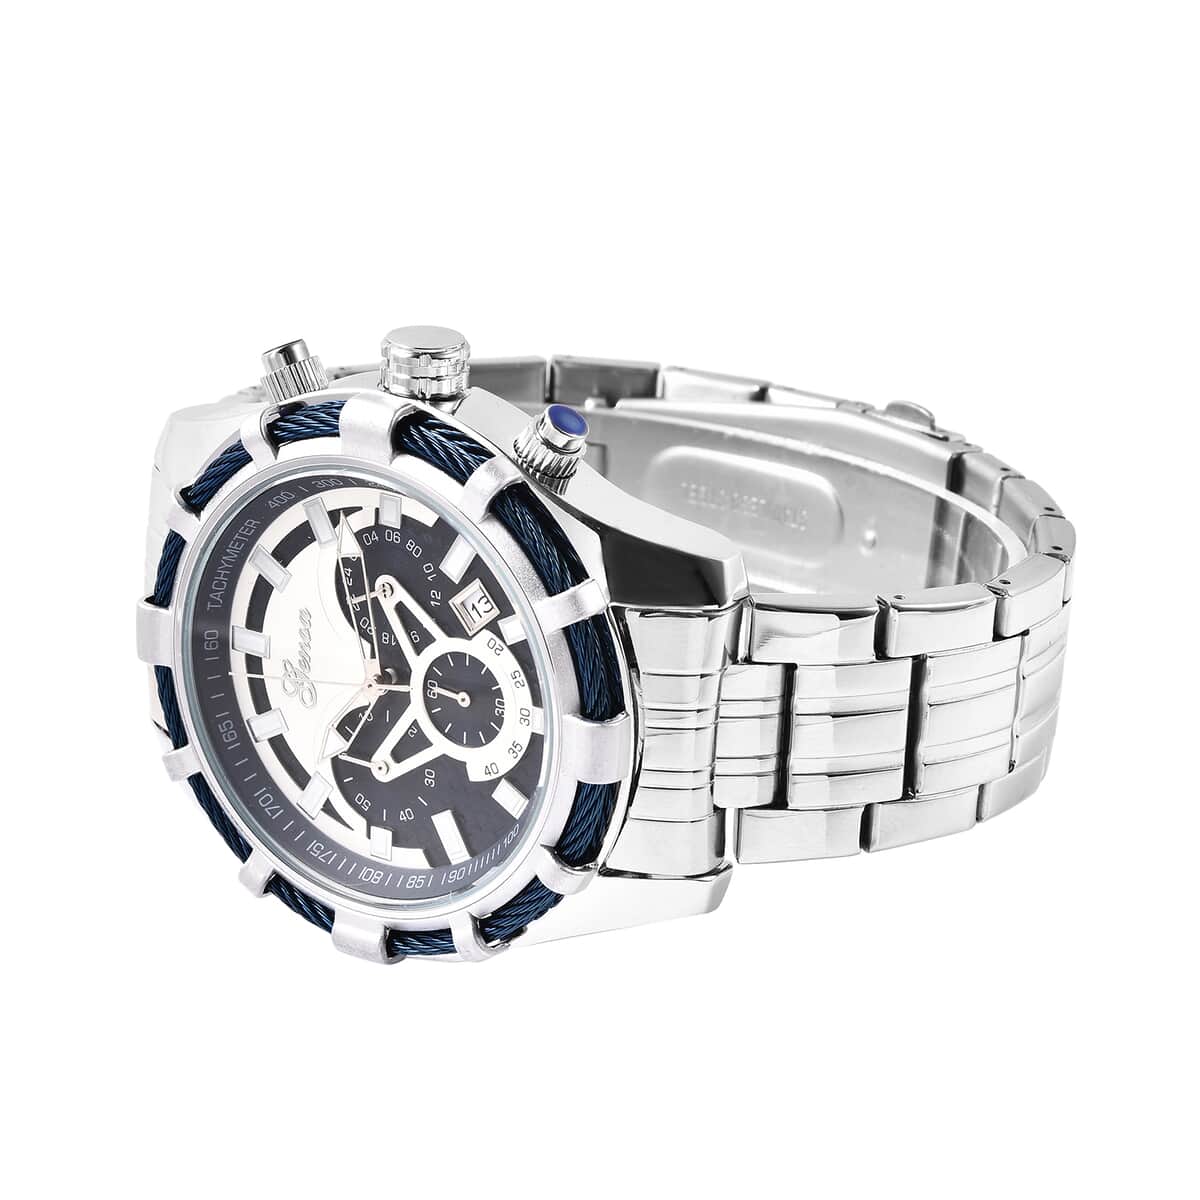 Genoa Multi-function Chronograph Watch with Stainless Steel Strap & Back (42mm) image number 4